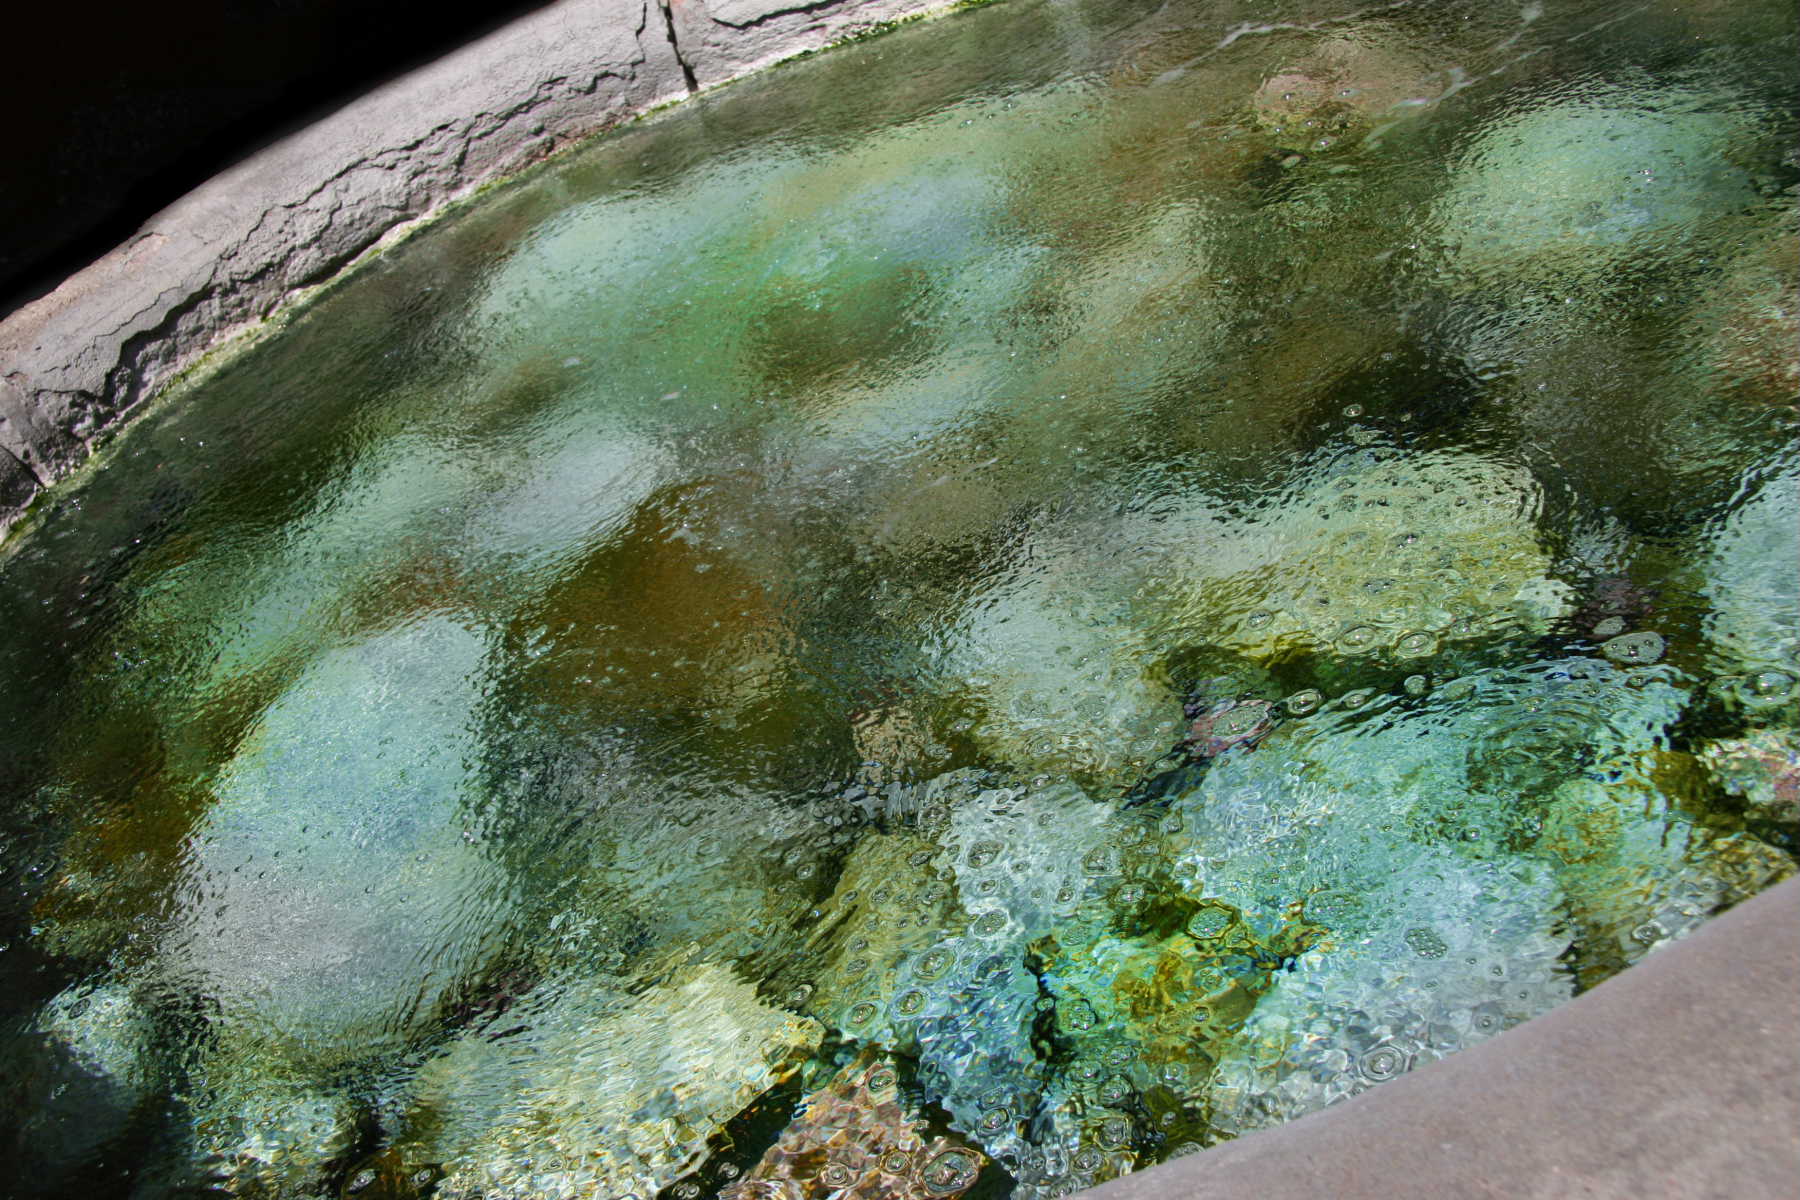 Mineral water from the source of the thermal springs is collected and used in complimentary foot soaks